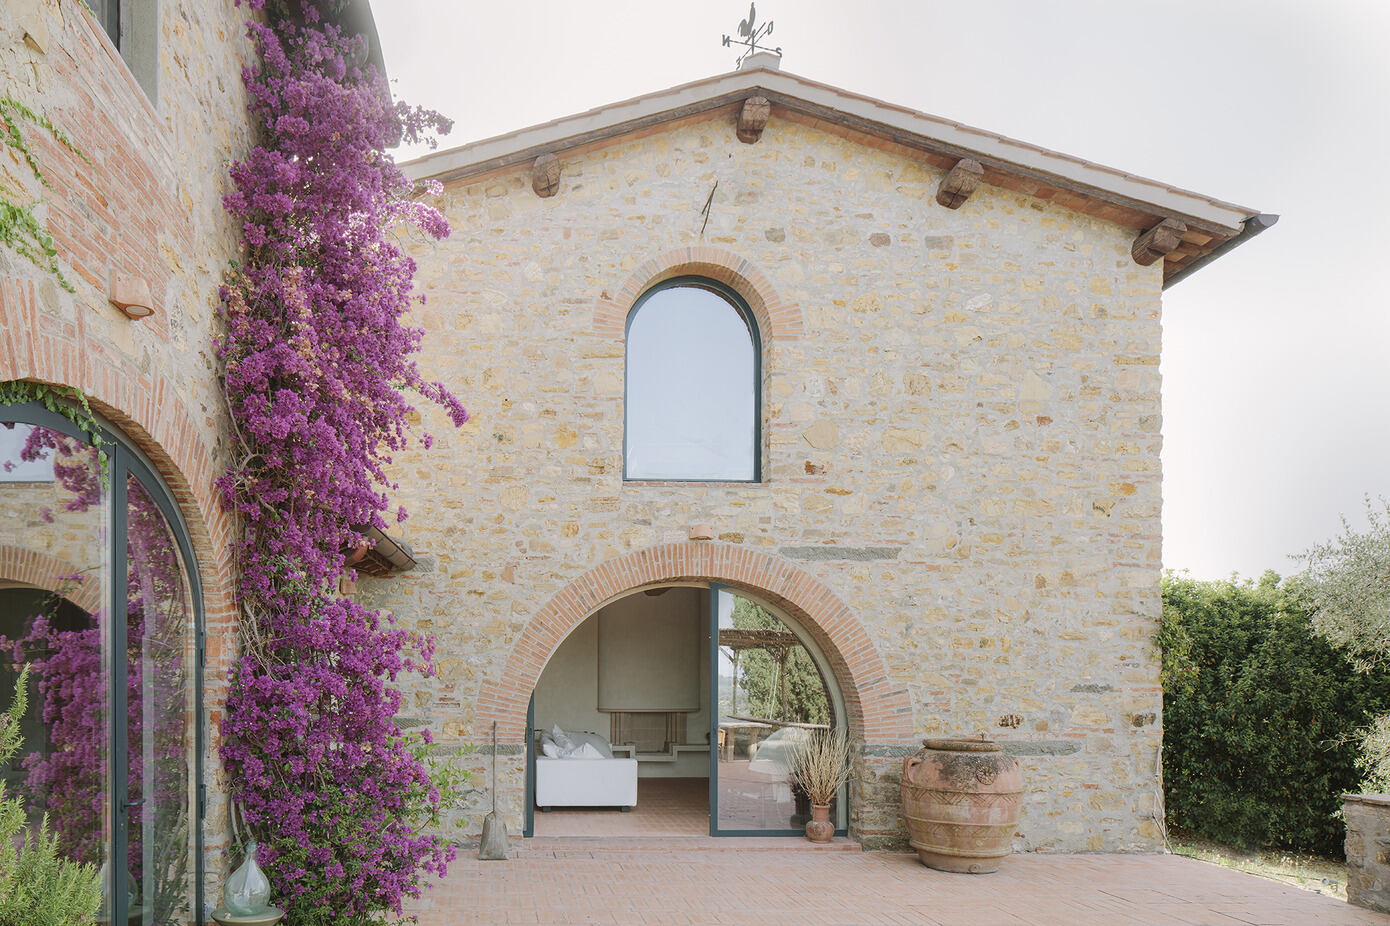 Farmhouse in Tuscany: The Ultimate Countryside Retreat